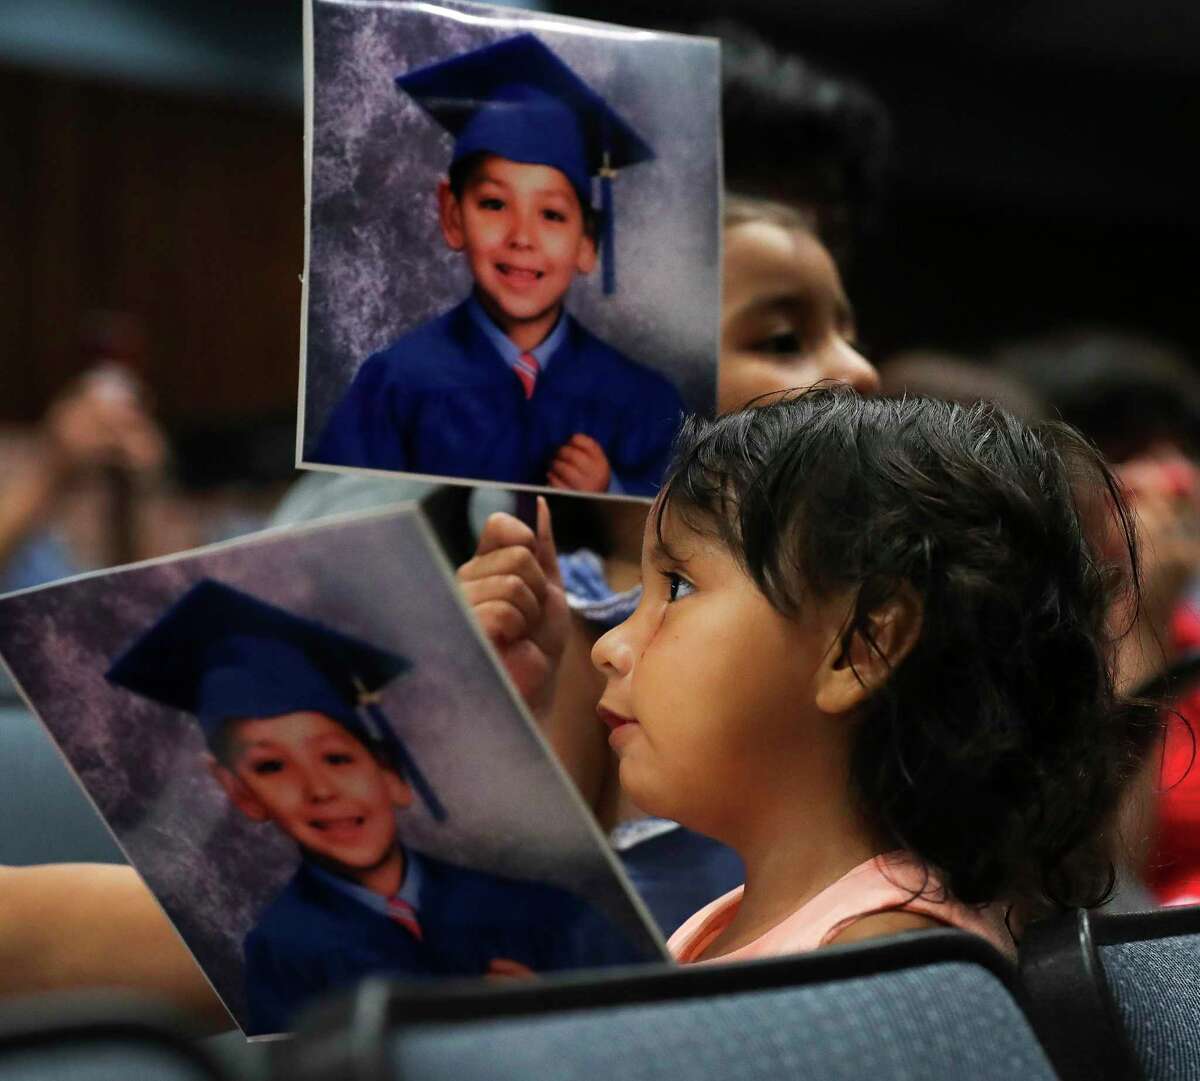 Jailyn Aguillar hold a kindergarten photo of her uncle, Ismael Salas, along with other family members during a summer graduation ceremony for Conroe ISD students at College Park High School, Thursday, July 28, 2022, in The Woodlands. Nearly 50 senior student from across Conroe ISD received their high school diplomas.